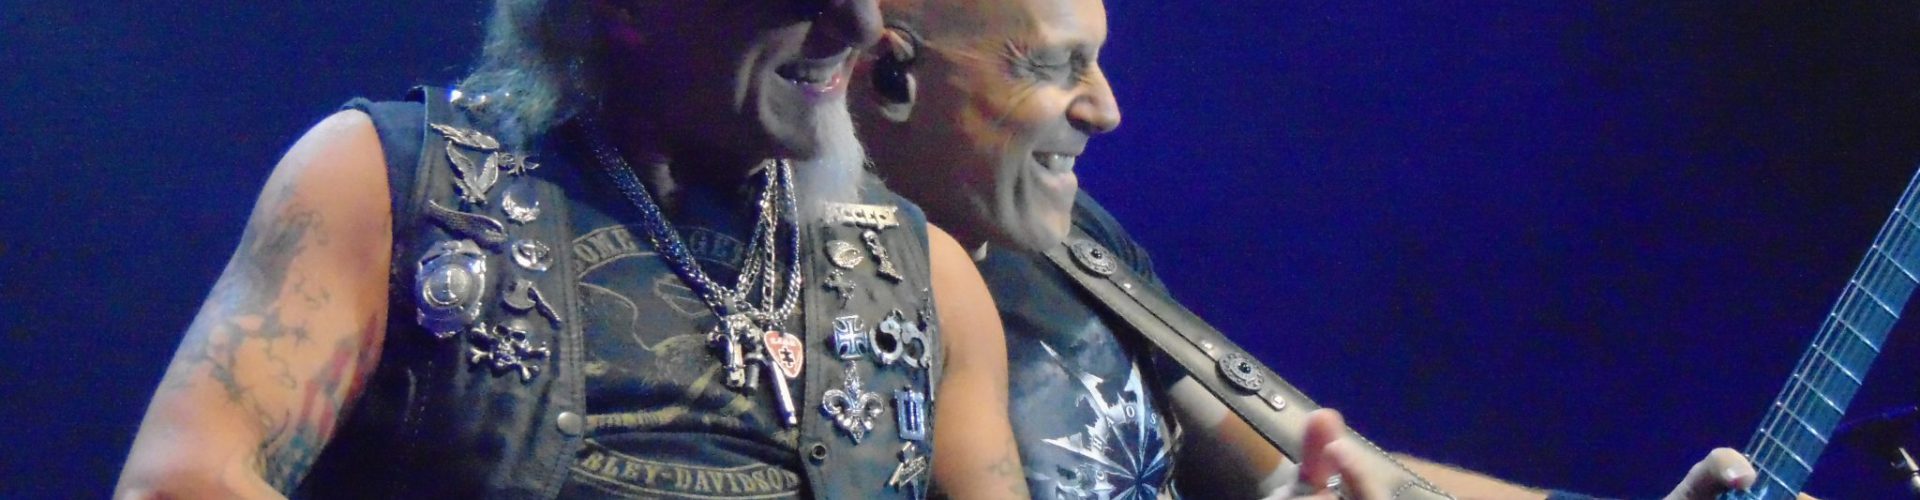 Accept mit Supportacts Mike Tramp – Songs Of White Lion und Induction